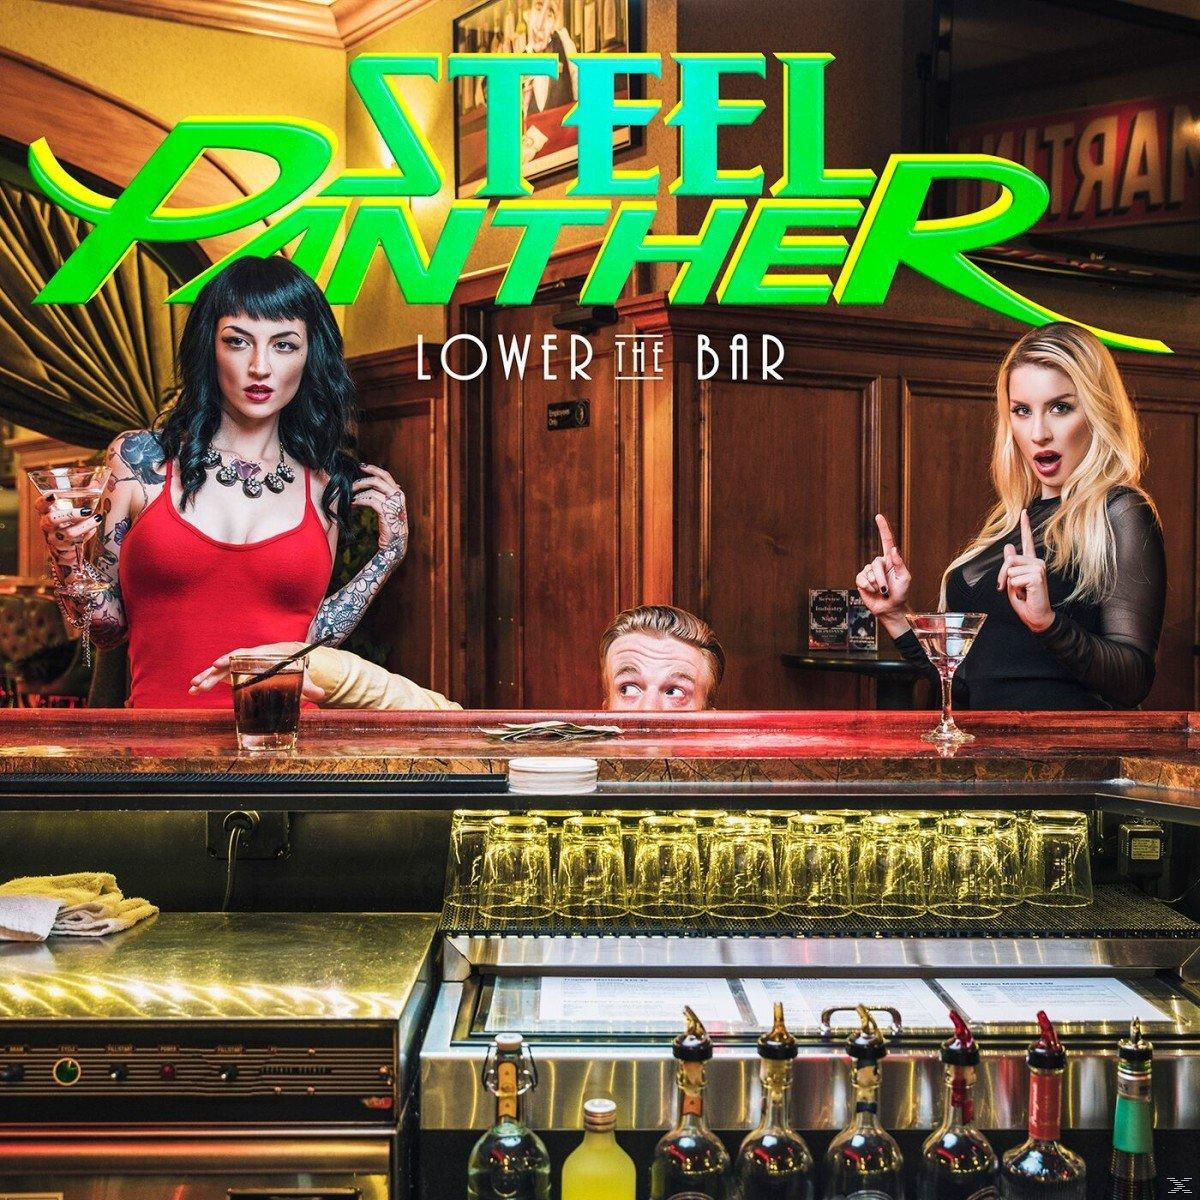 Steel BAR (DELUXE LOWER - THE EDITION) (CD) - Panther